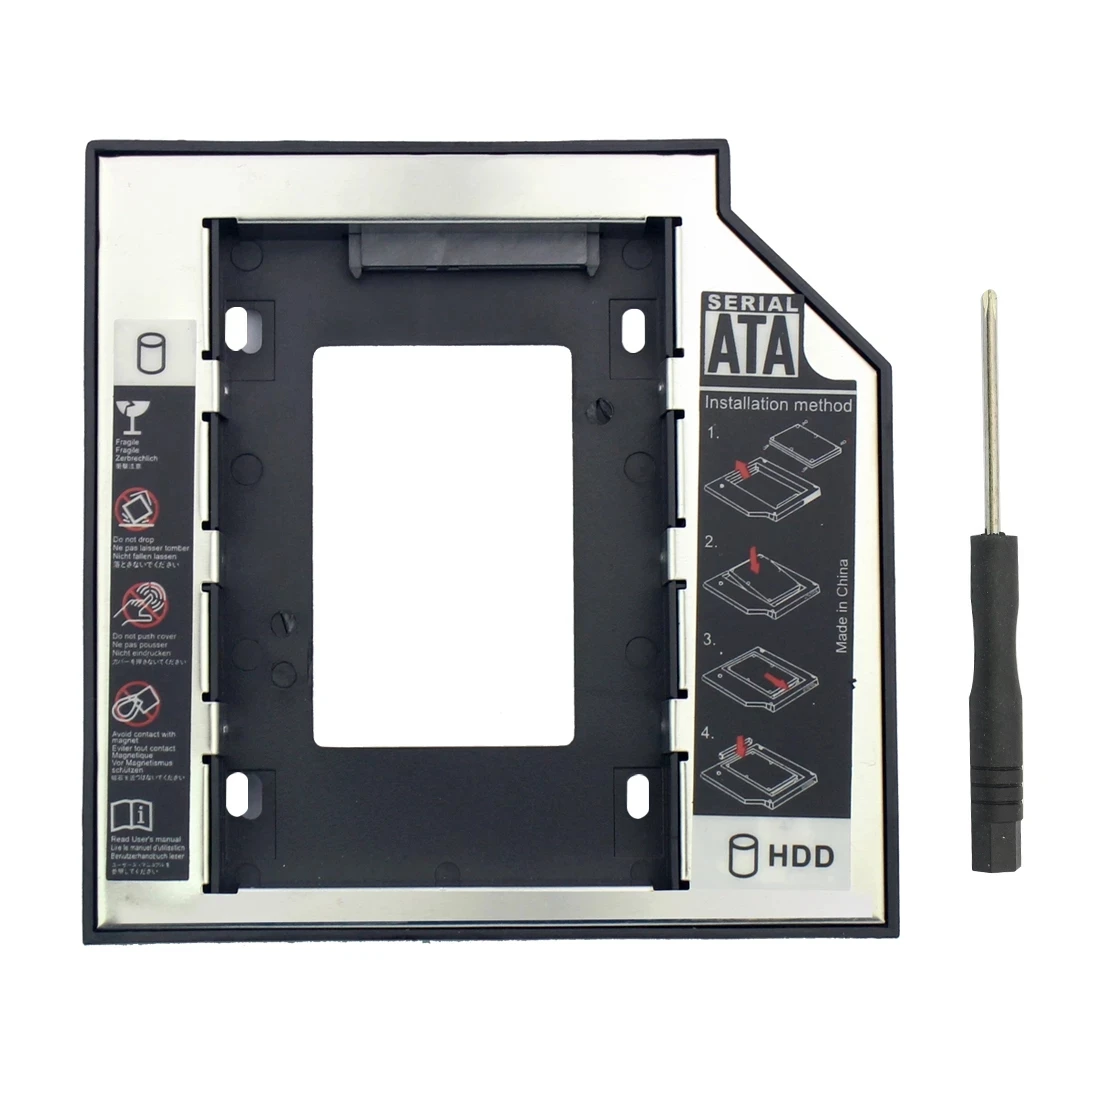 tidligste Lave om Mentor Source 12.7mm SSD Adapter SATA 3.0 HDD Hard Disk Drive CD-ROM Bracket 2.5"  Laptop HDD Caddy Adapter Internal Enclosure for Computer PC on m.alibaba.com